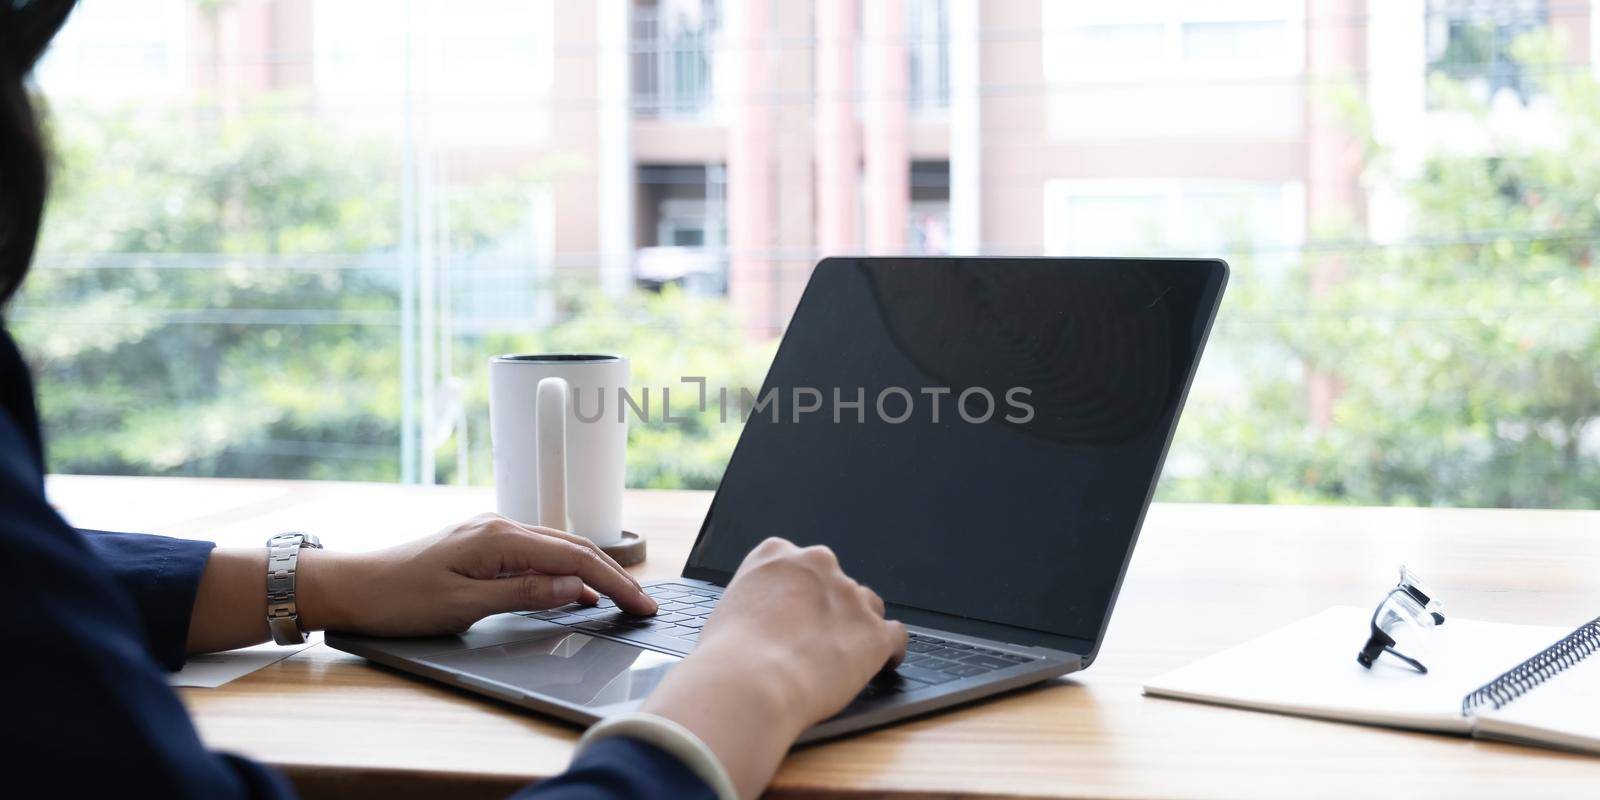 Over shoulder close up view of female hands typing on laptop with mock-up screen on office desk with stationery.